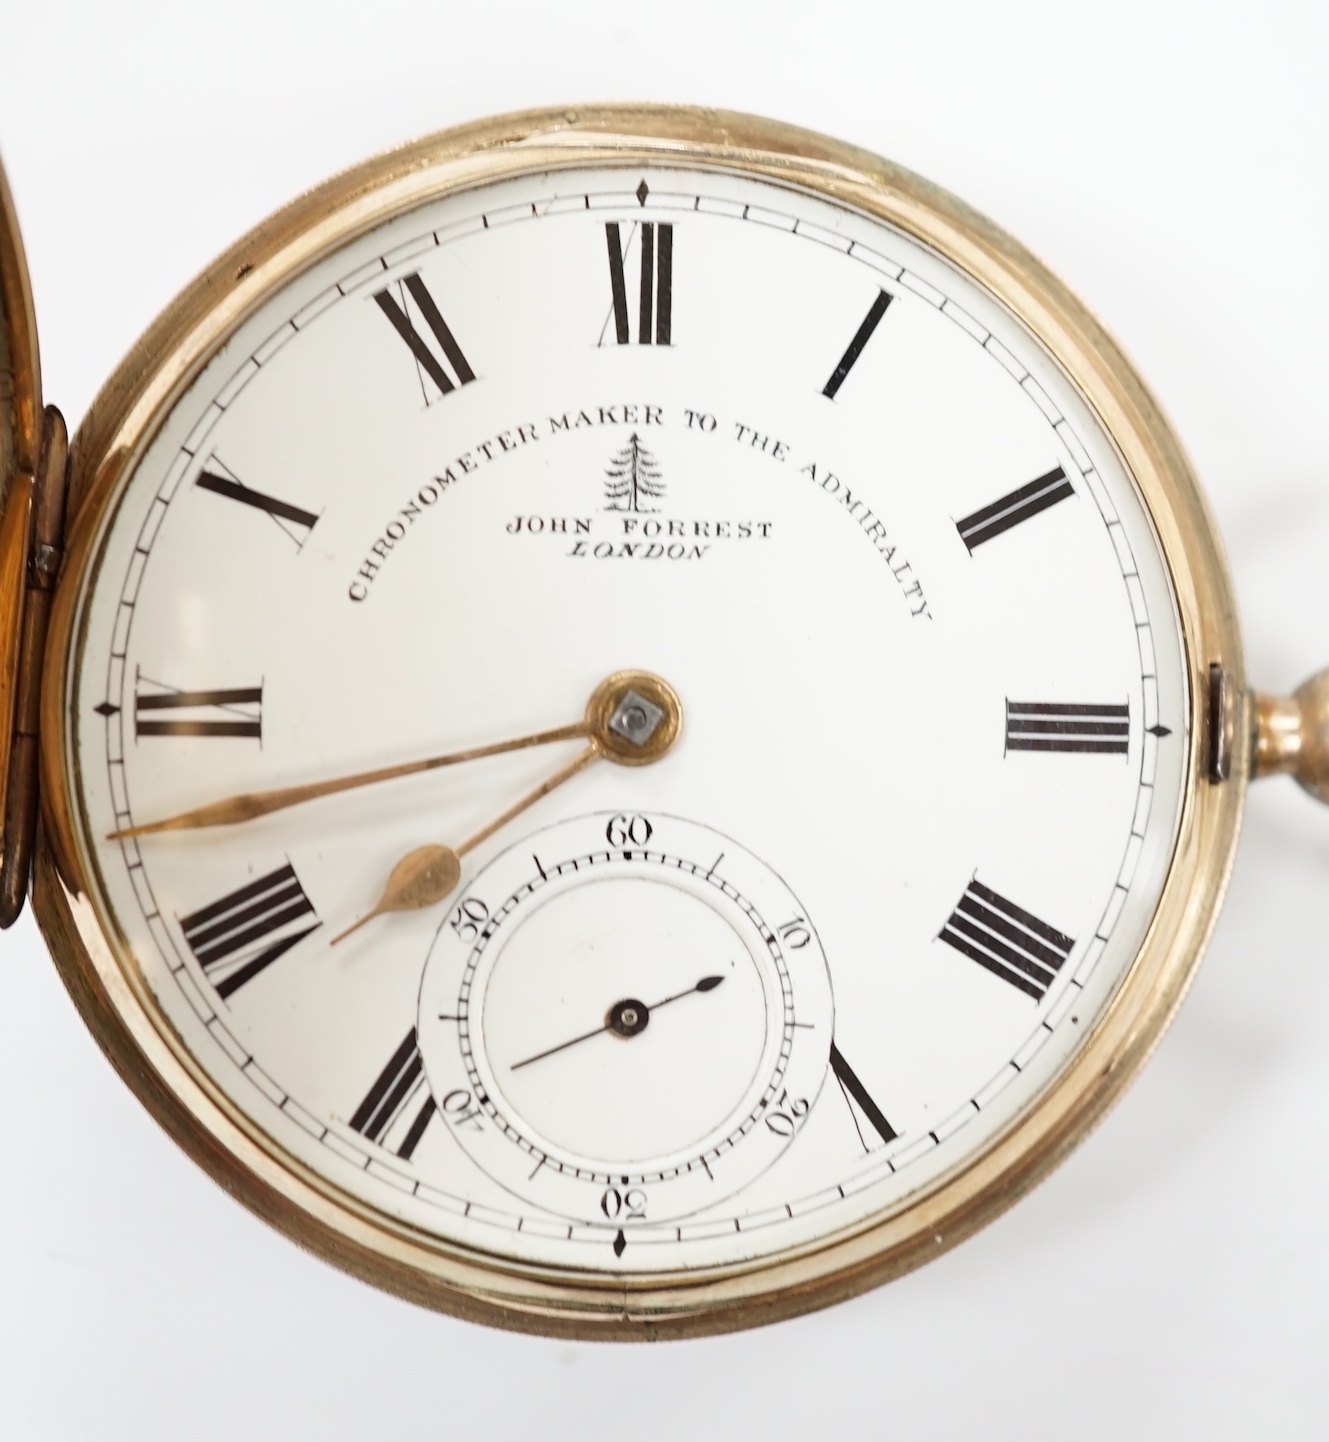 An Edwardian engraved 9ct gold keywind hunter pocket watch by John Forrest, London, chronometer maker to the Admiralty